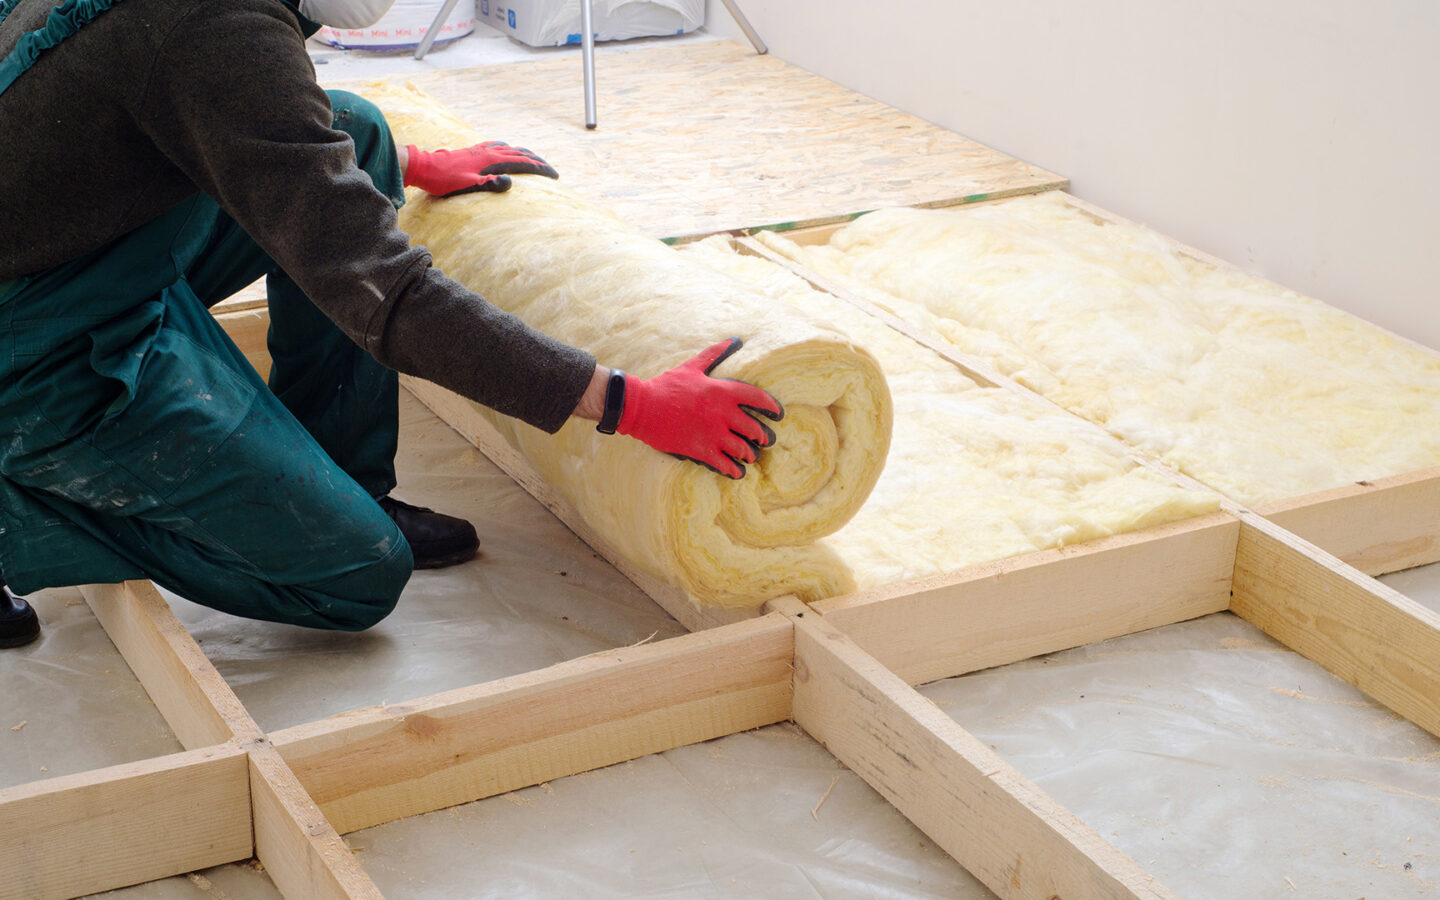 A person wearing long sleeves, overalls, and work gloves lays out fiberglass insulation under a floor.